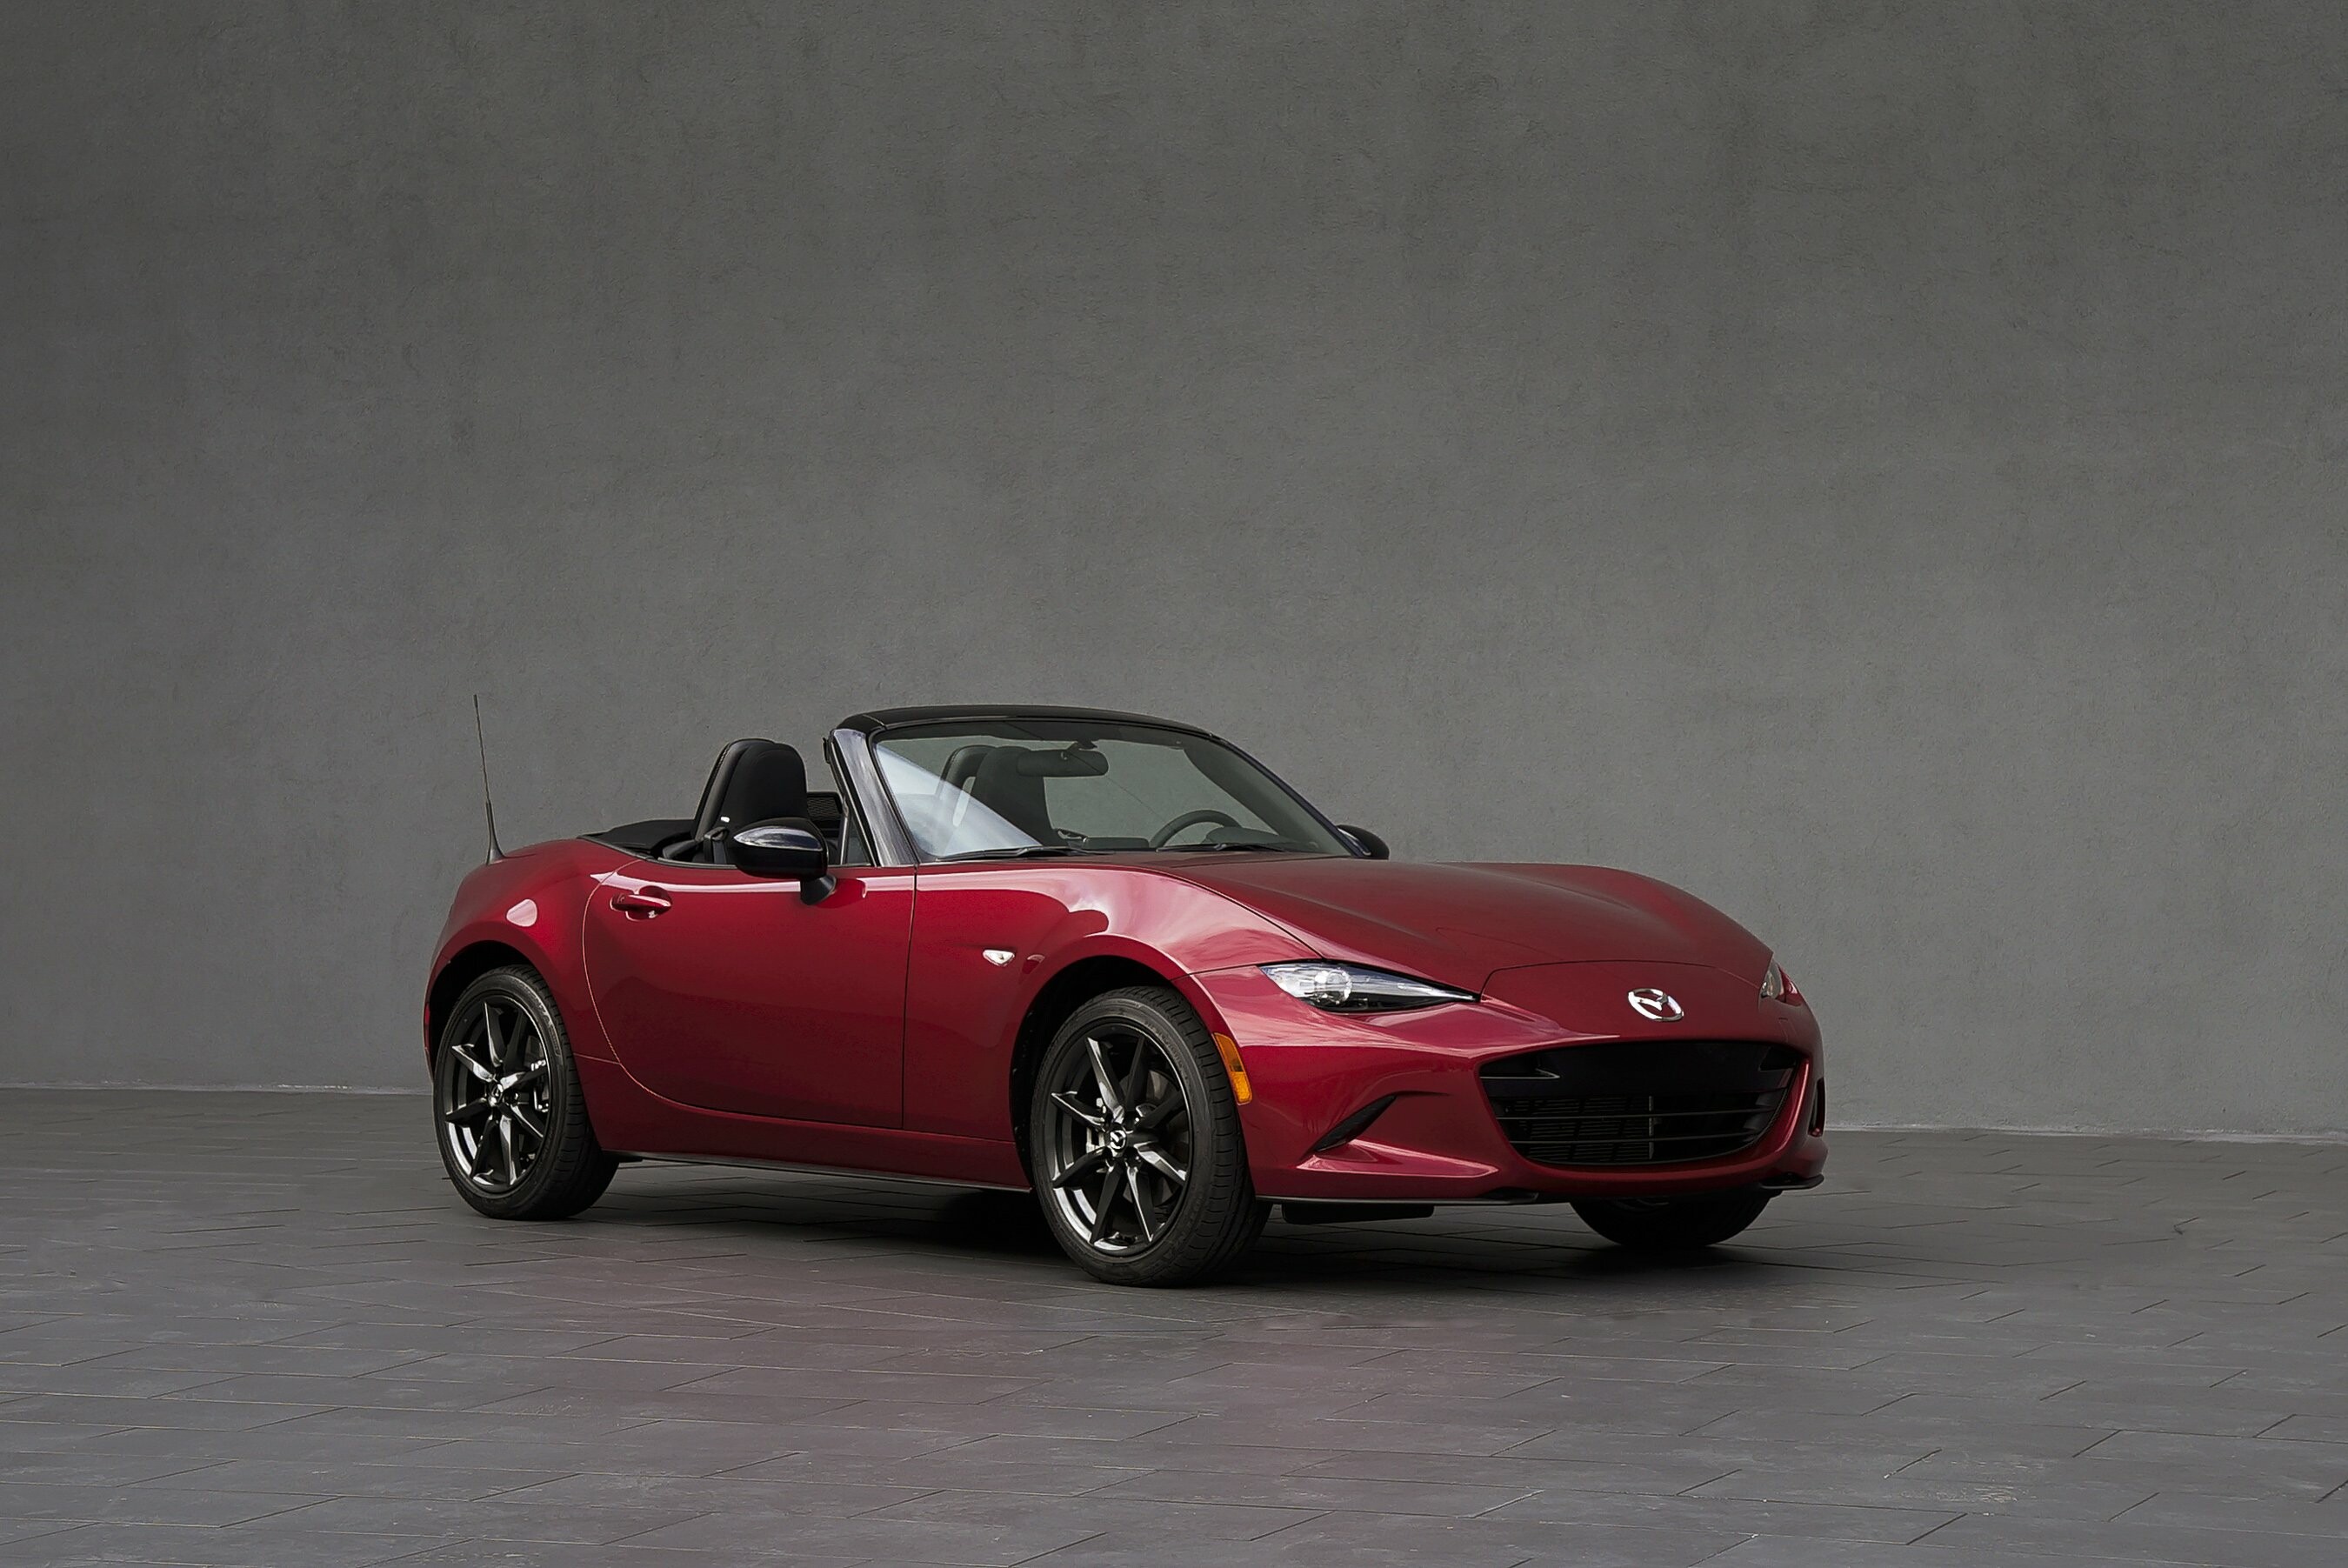 Mazda MX-5 Miata: Cars, Roadster, The first generation was in production until 1997. 2700x1810 HD Background.